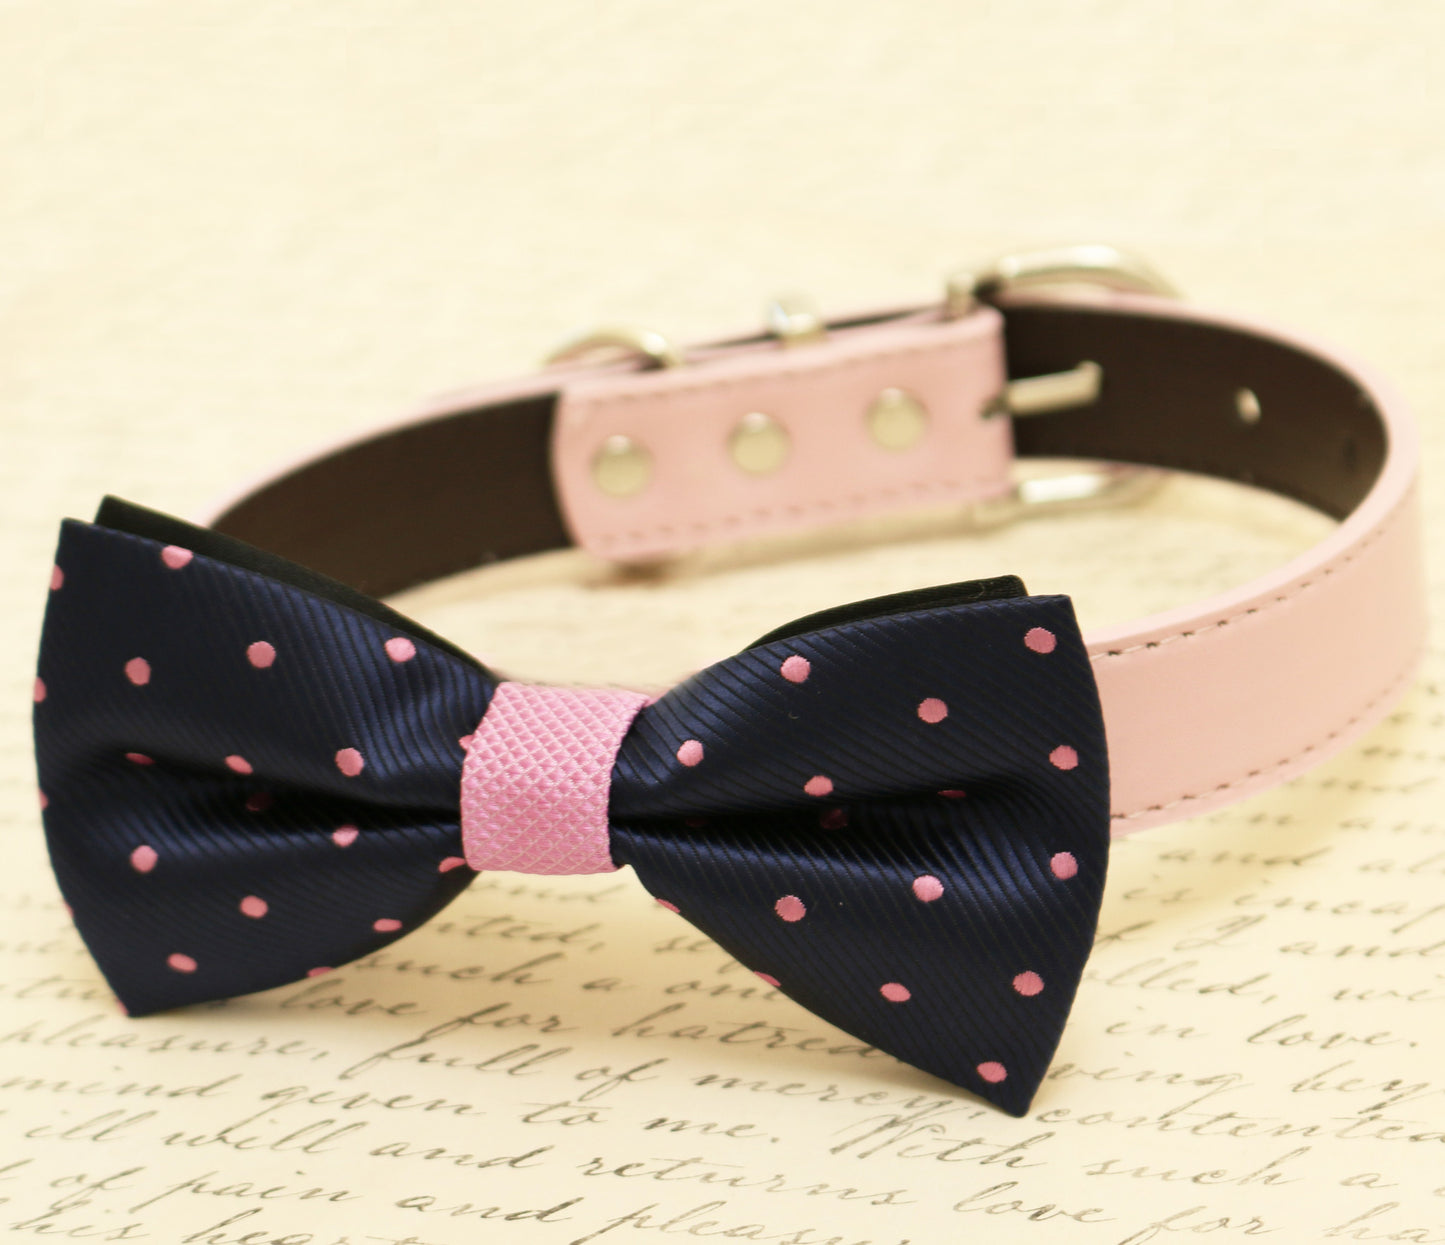 Navy and Lavender dog Bow tie attached to collar, Navy Wedding , Wedding dog collar